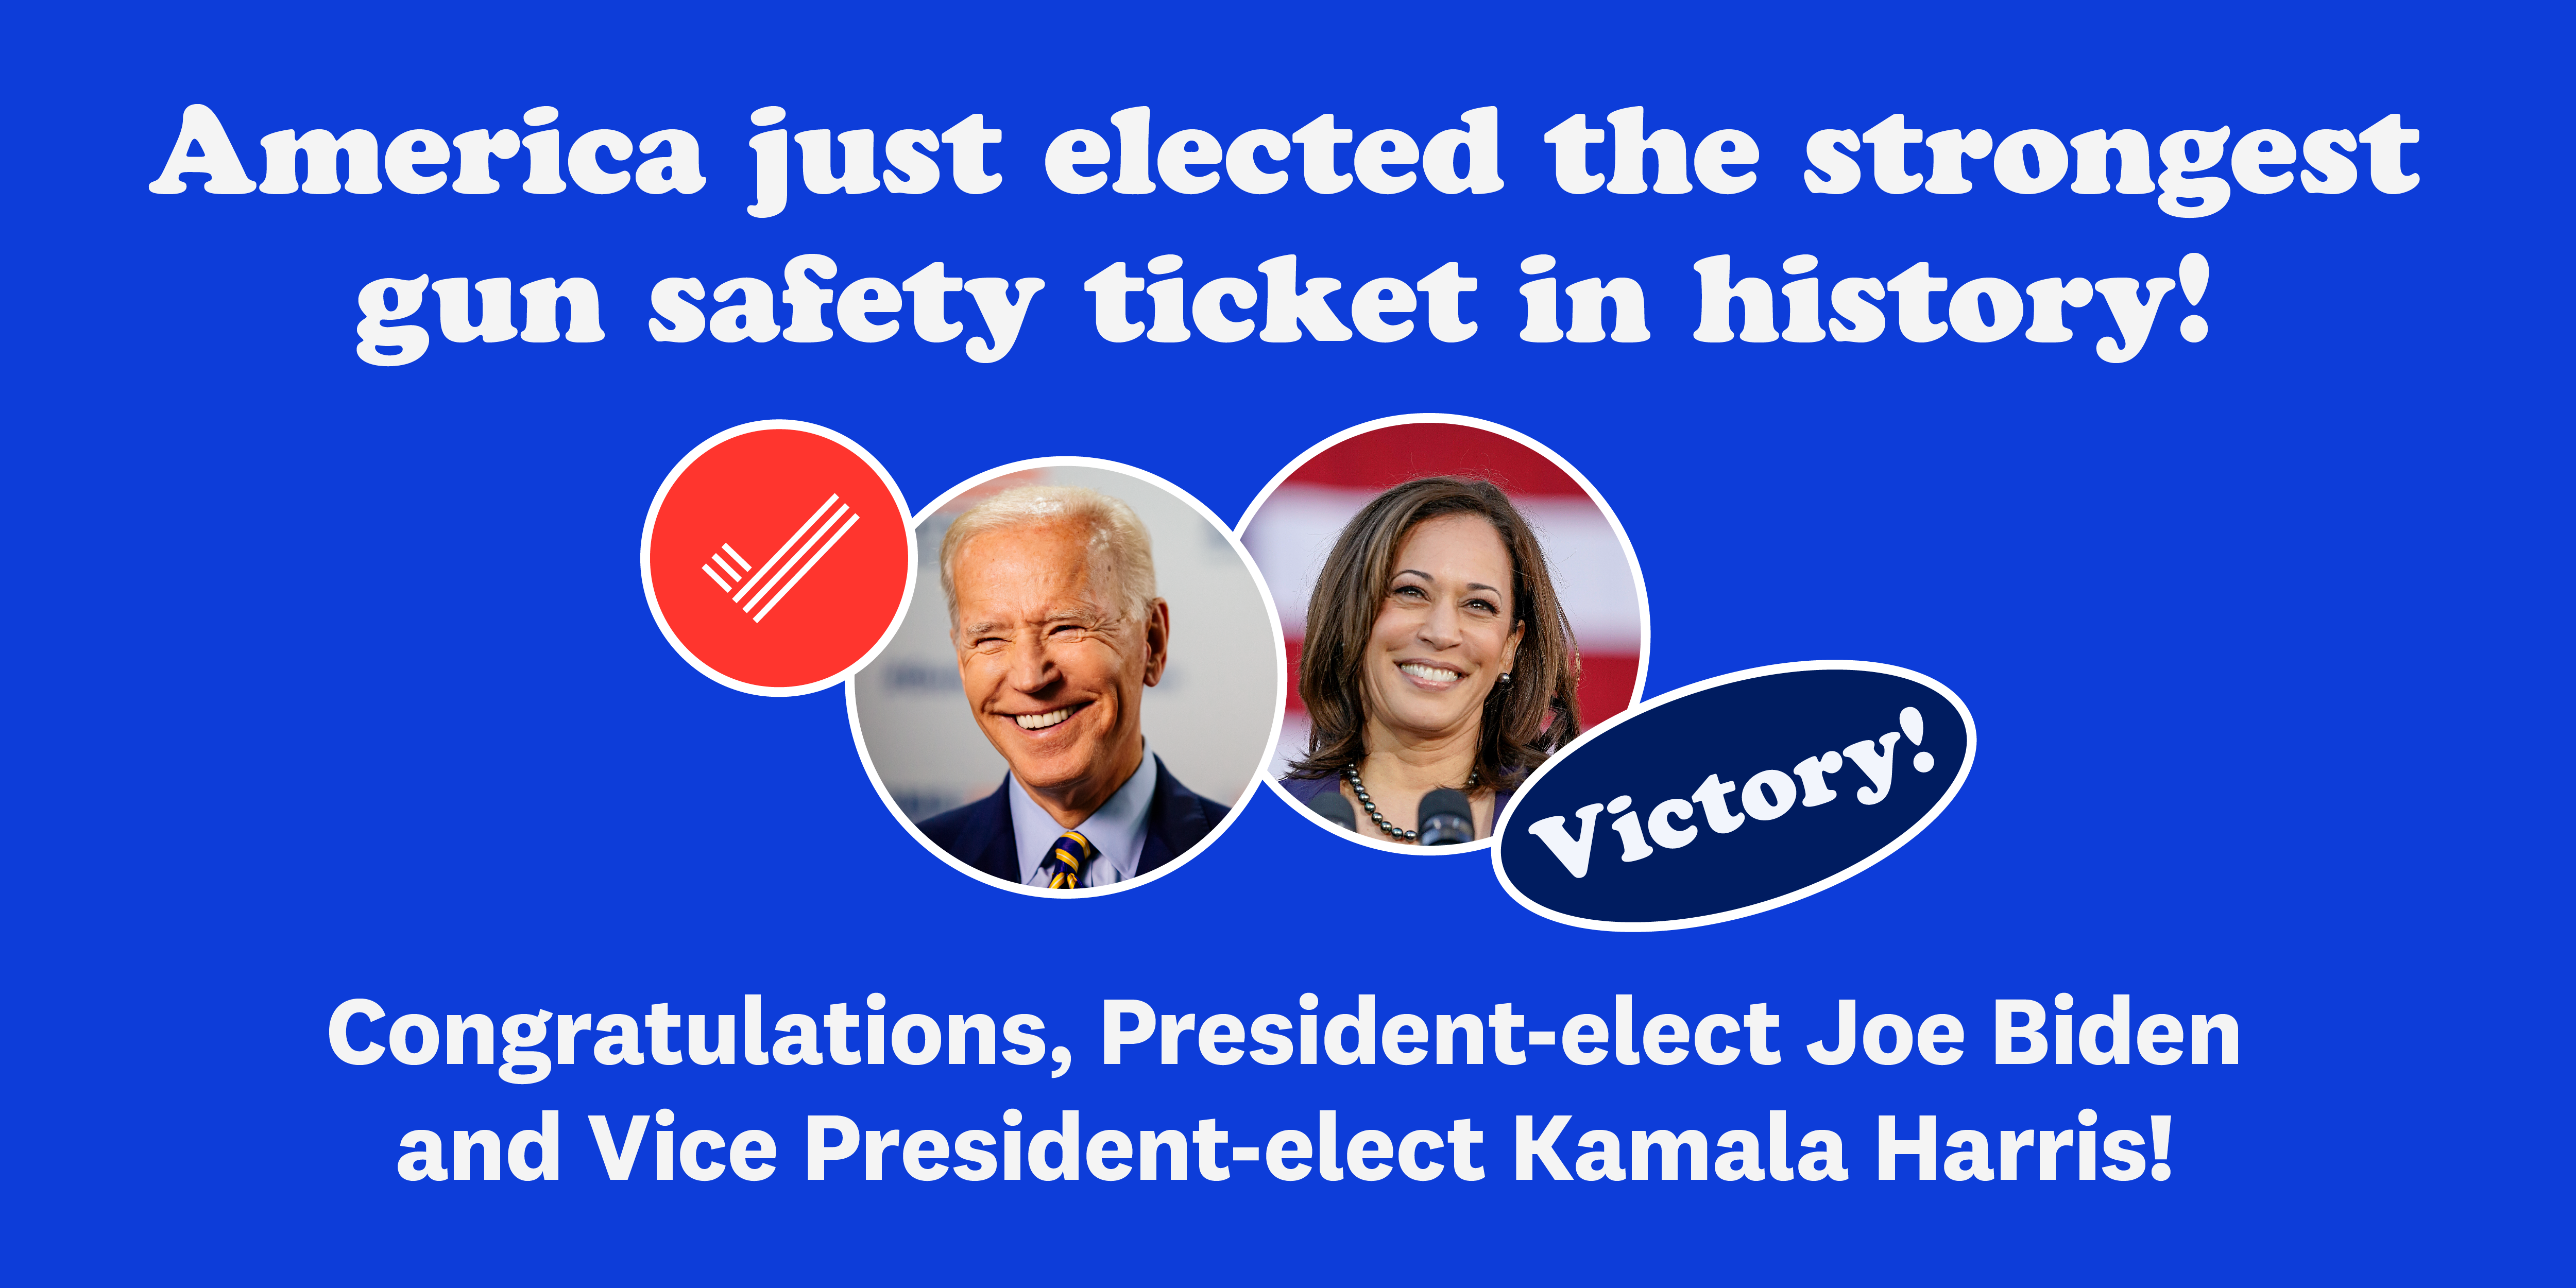 America just elected the strongest gun safety ticket in history!